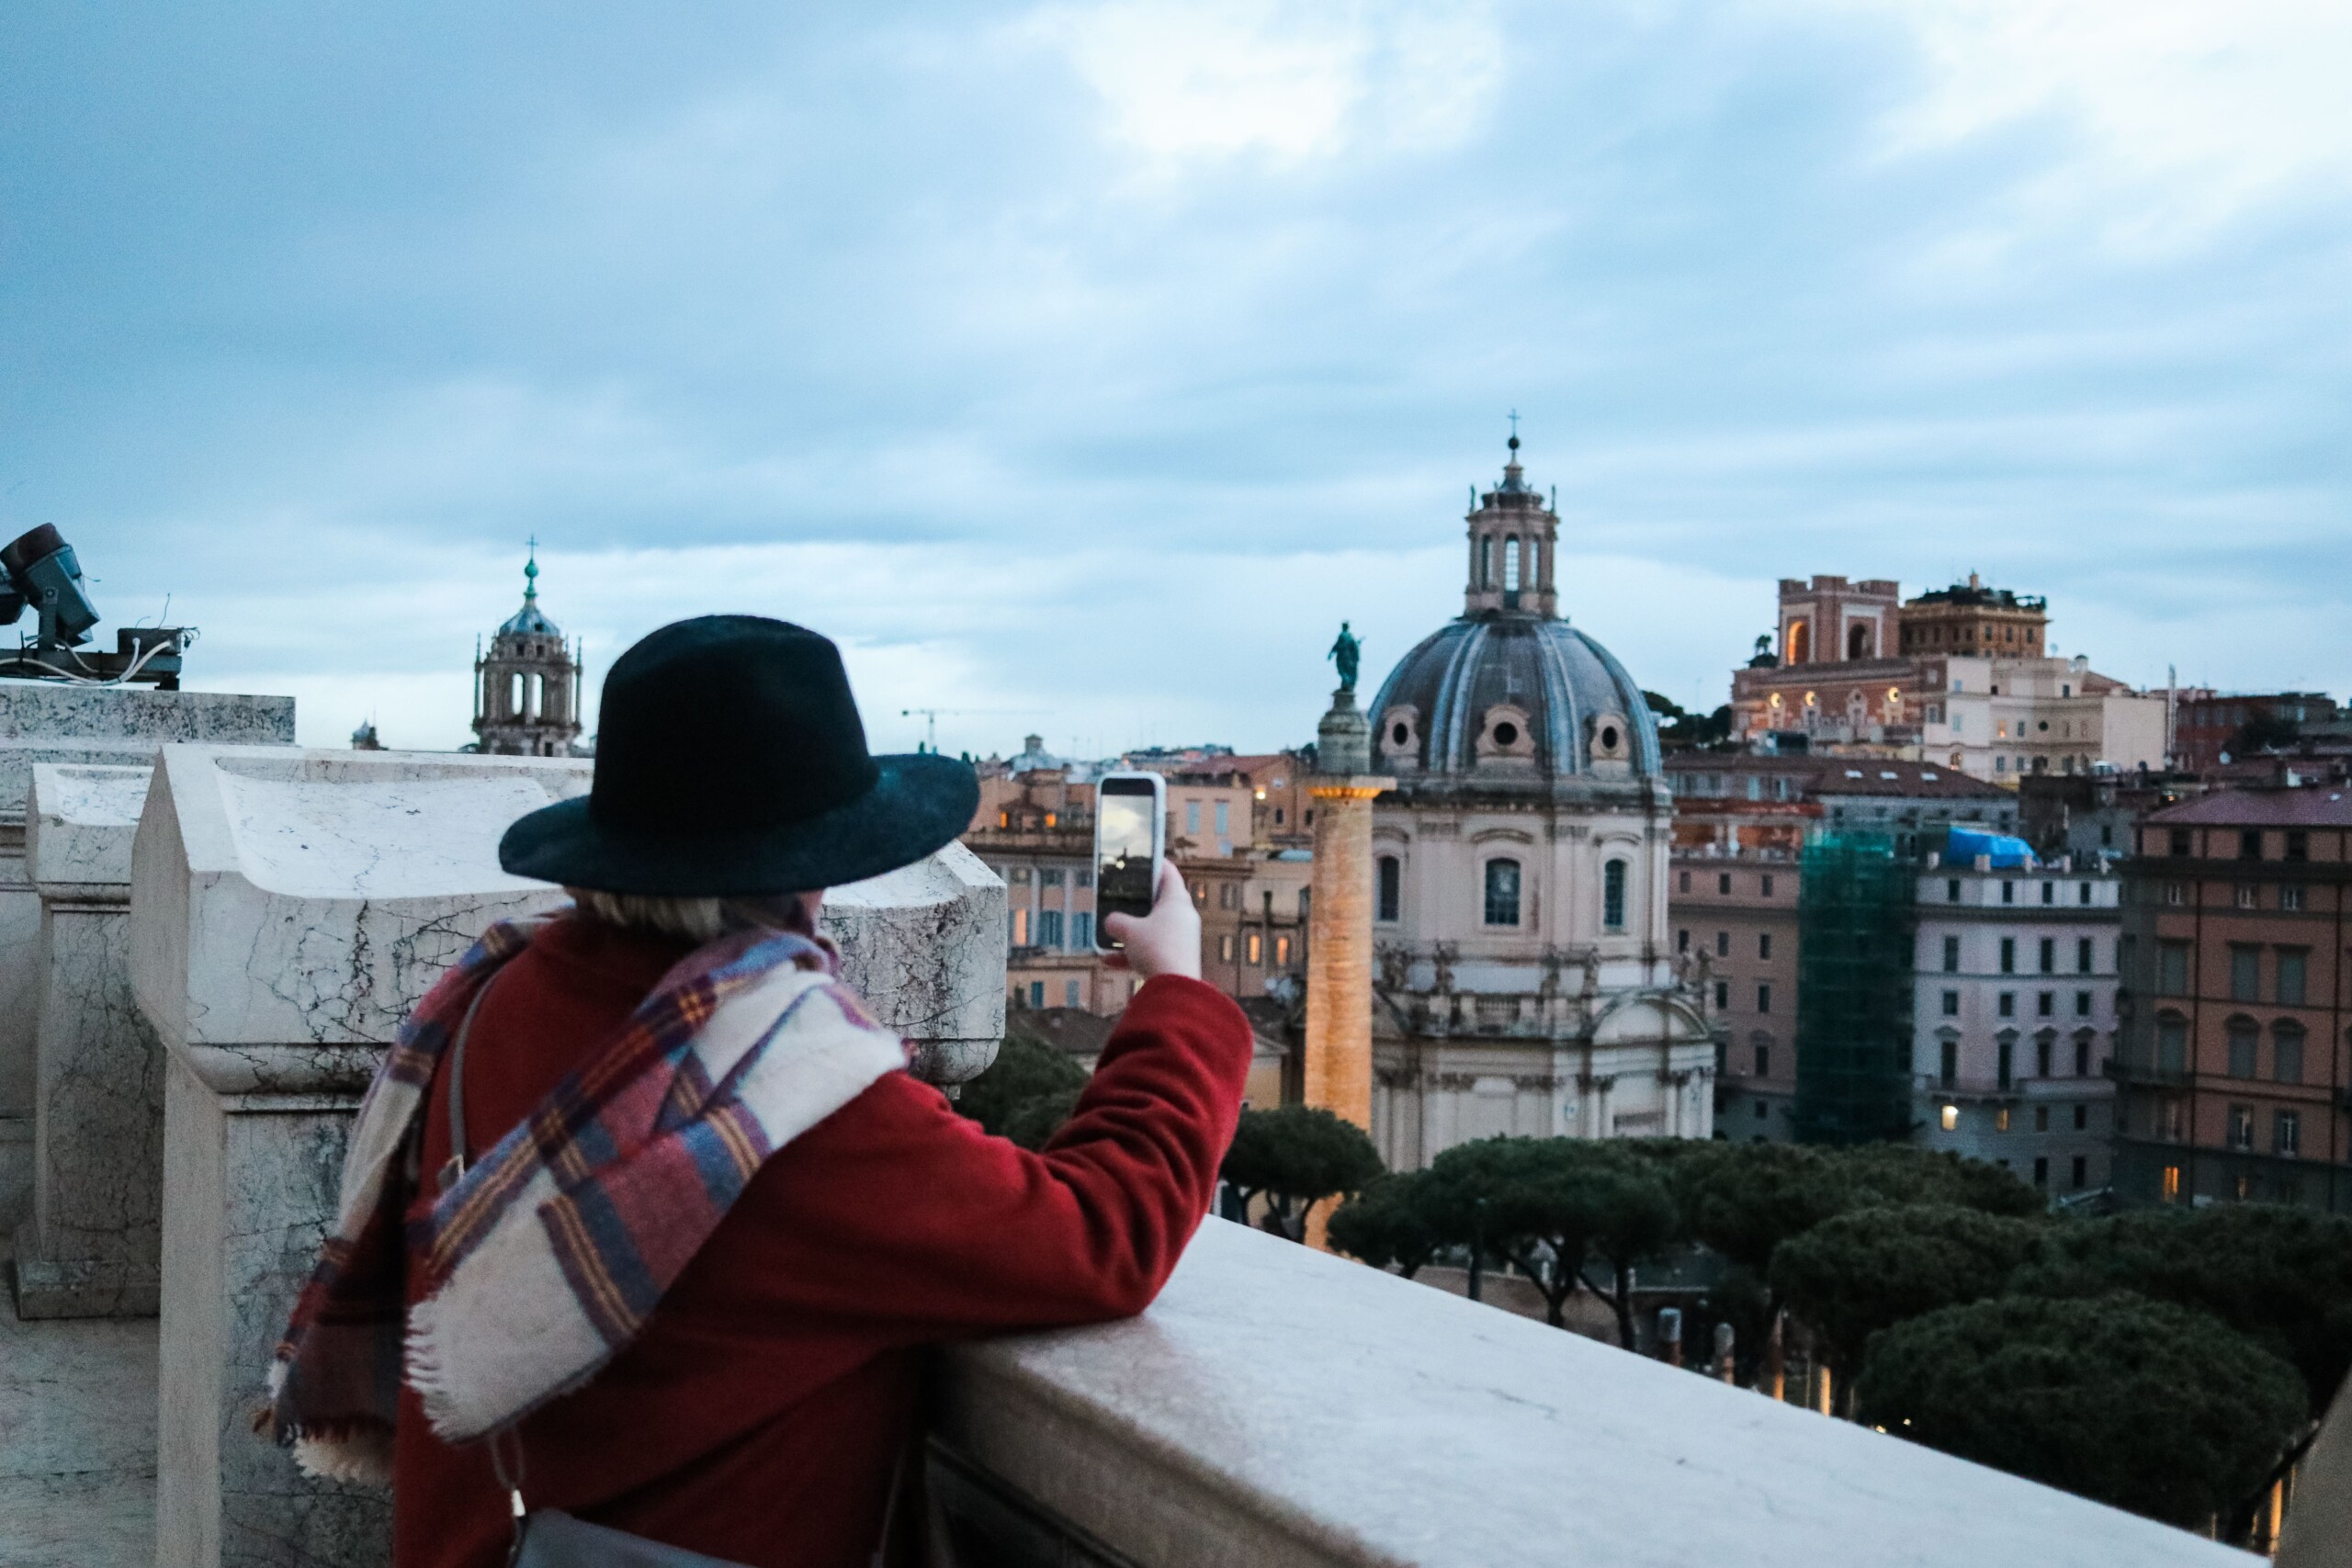 A woman takes a photo looking out over Rome